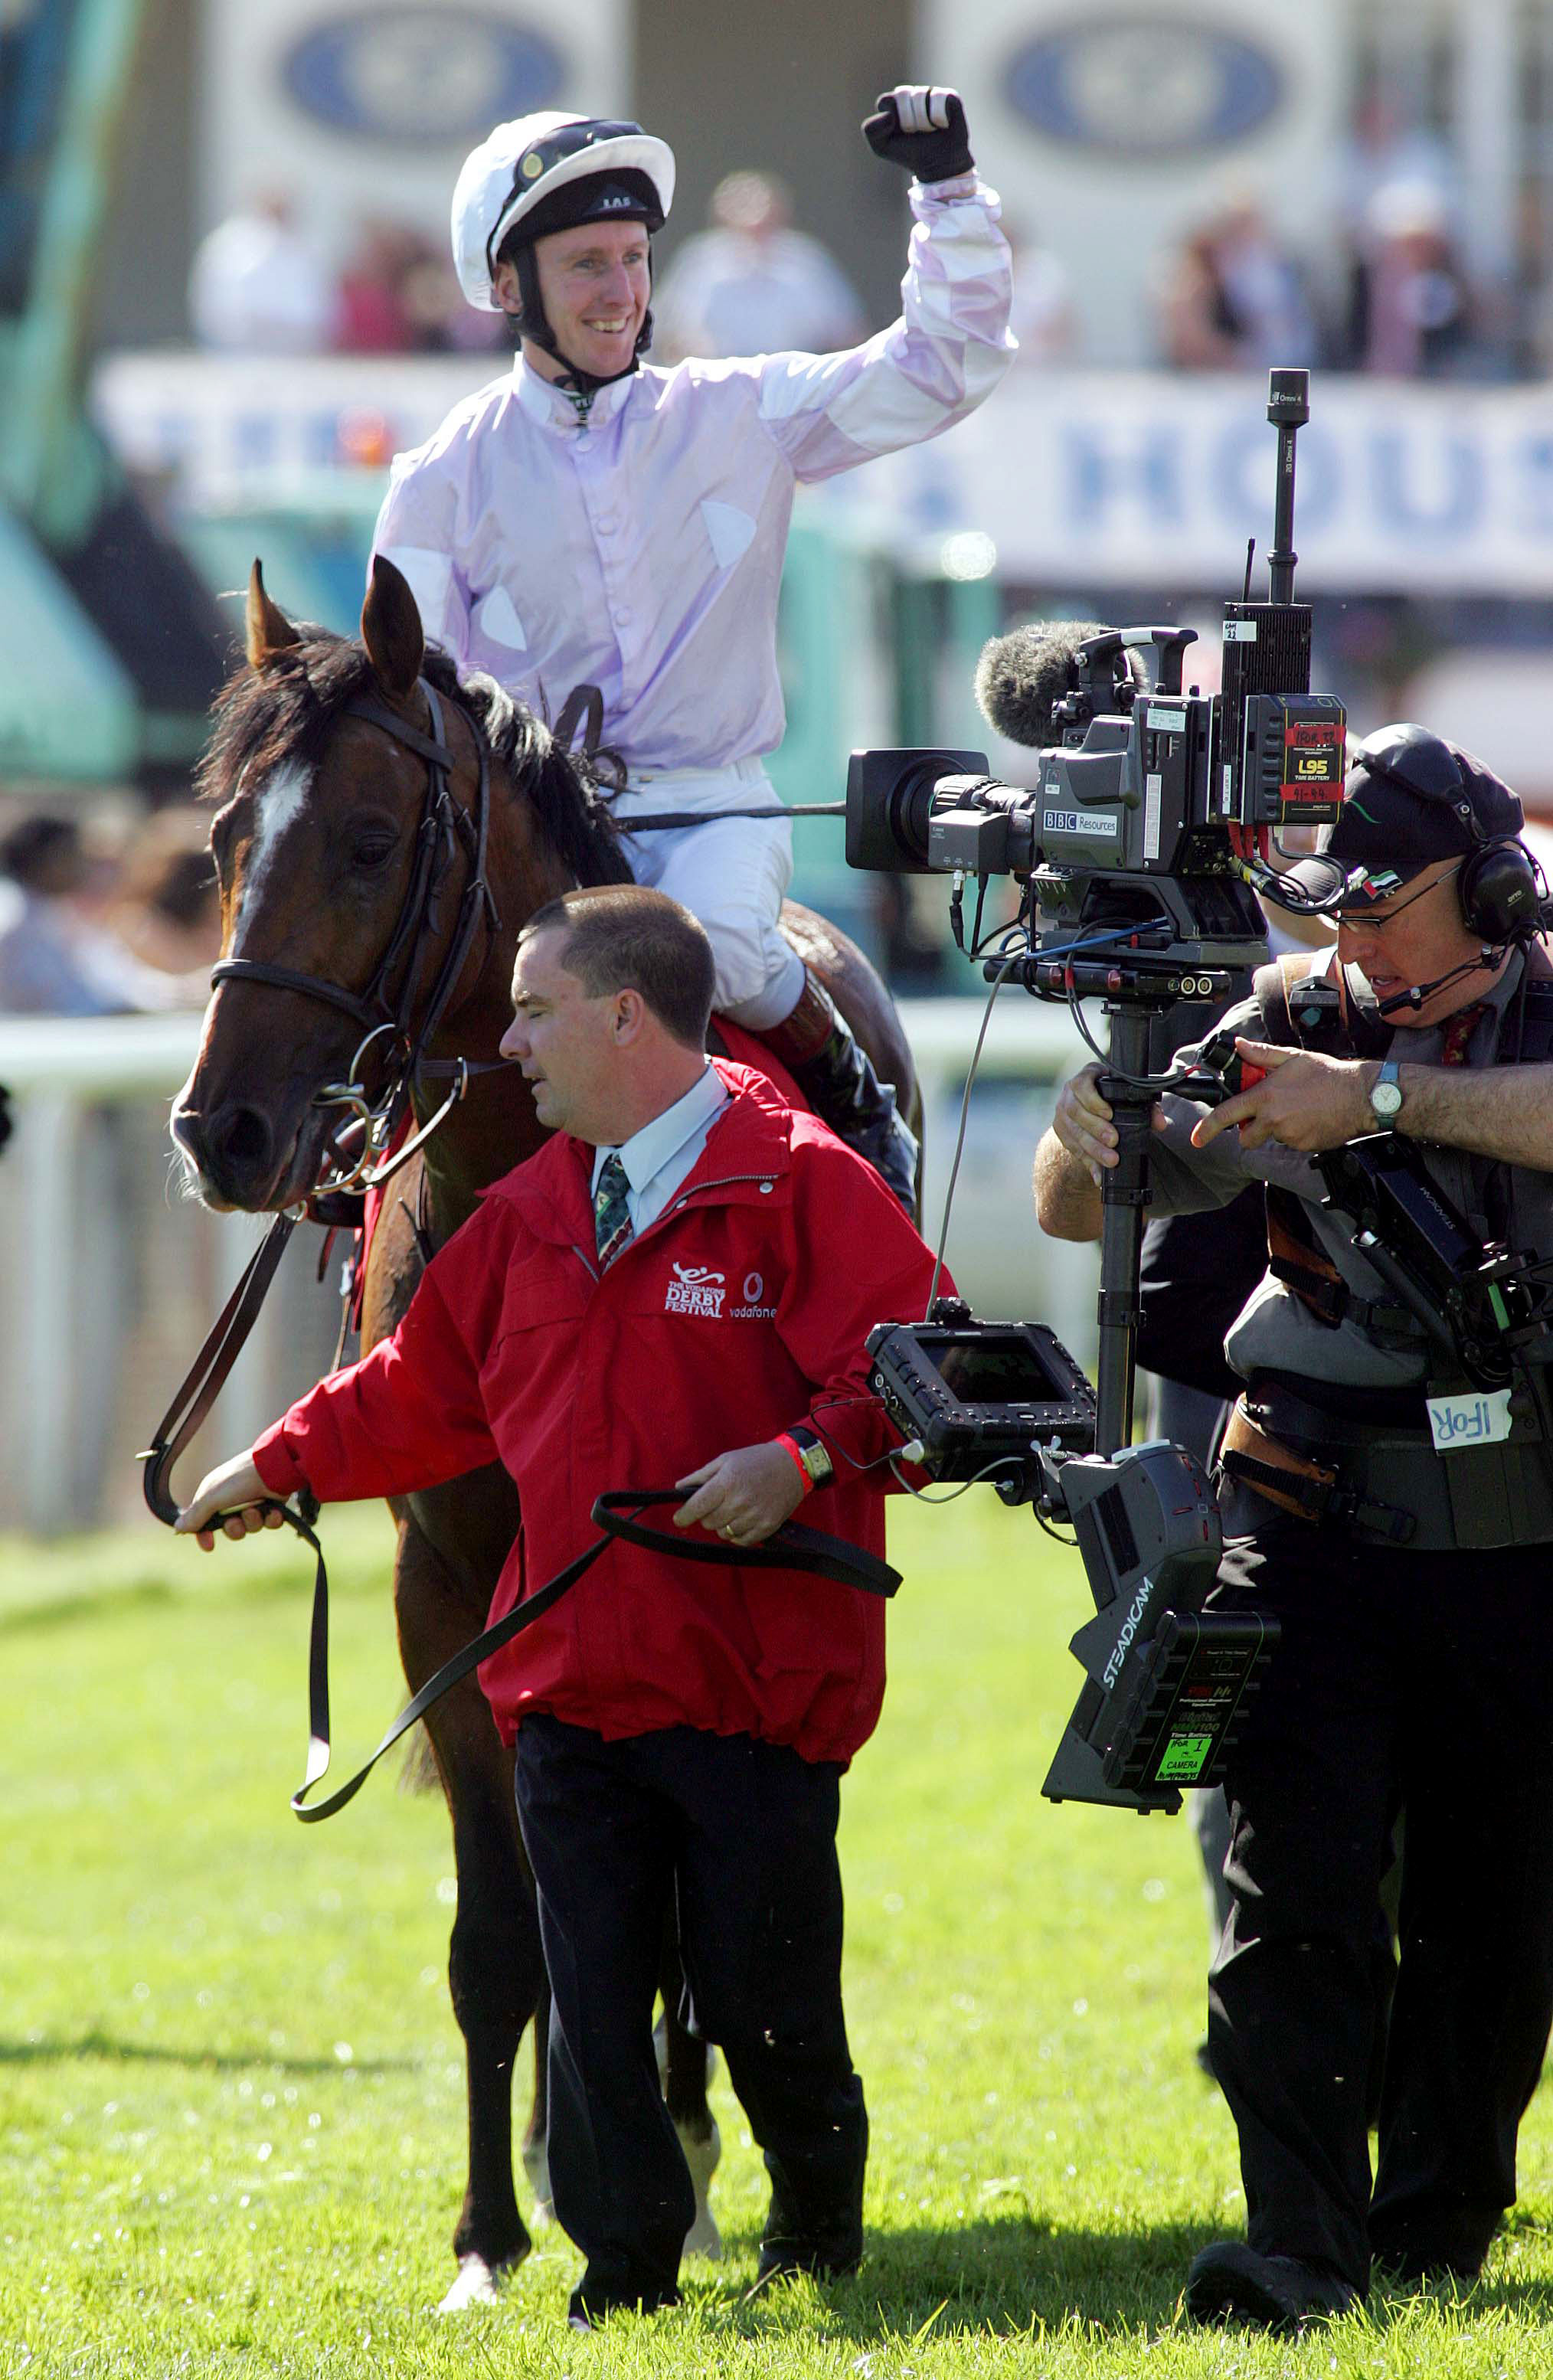 Finest hour: Martin Dwyer punches the air after winning the Derby on Sir Percy. Photo: Dan Abraham / focusonracing.com